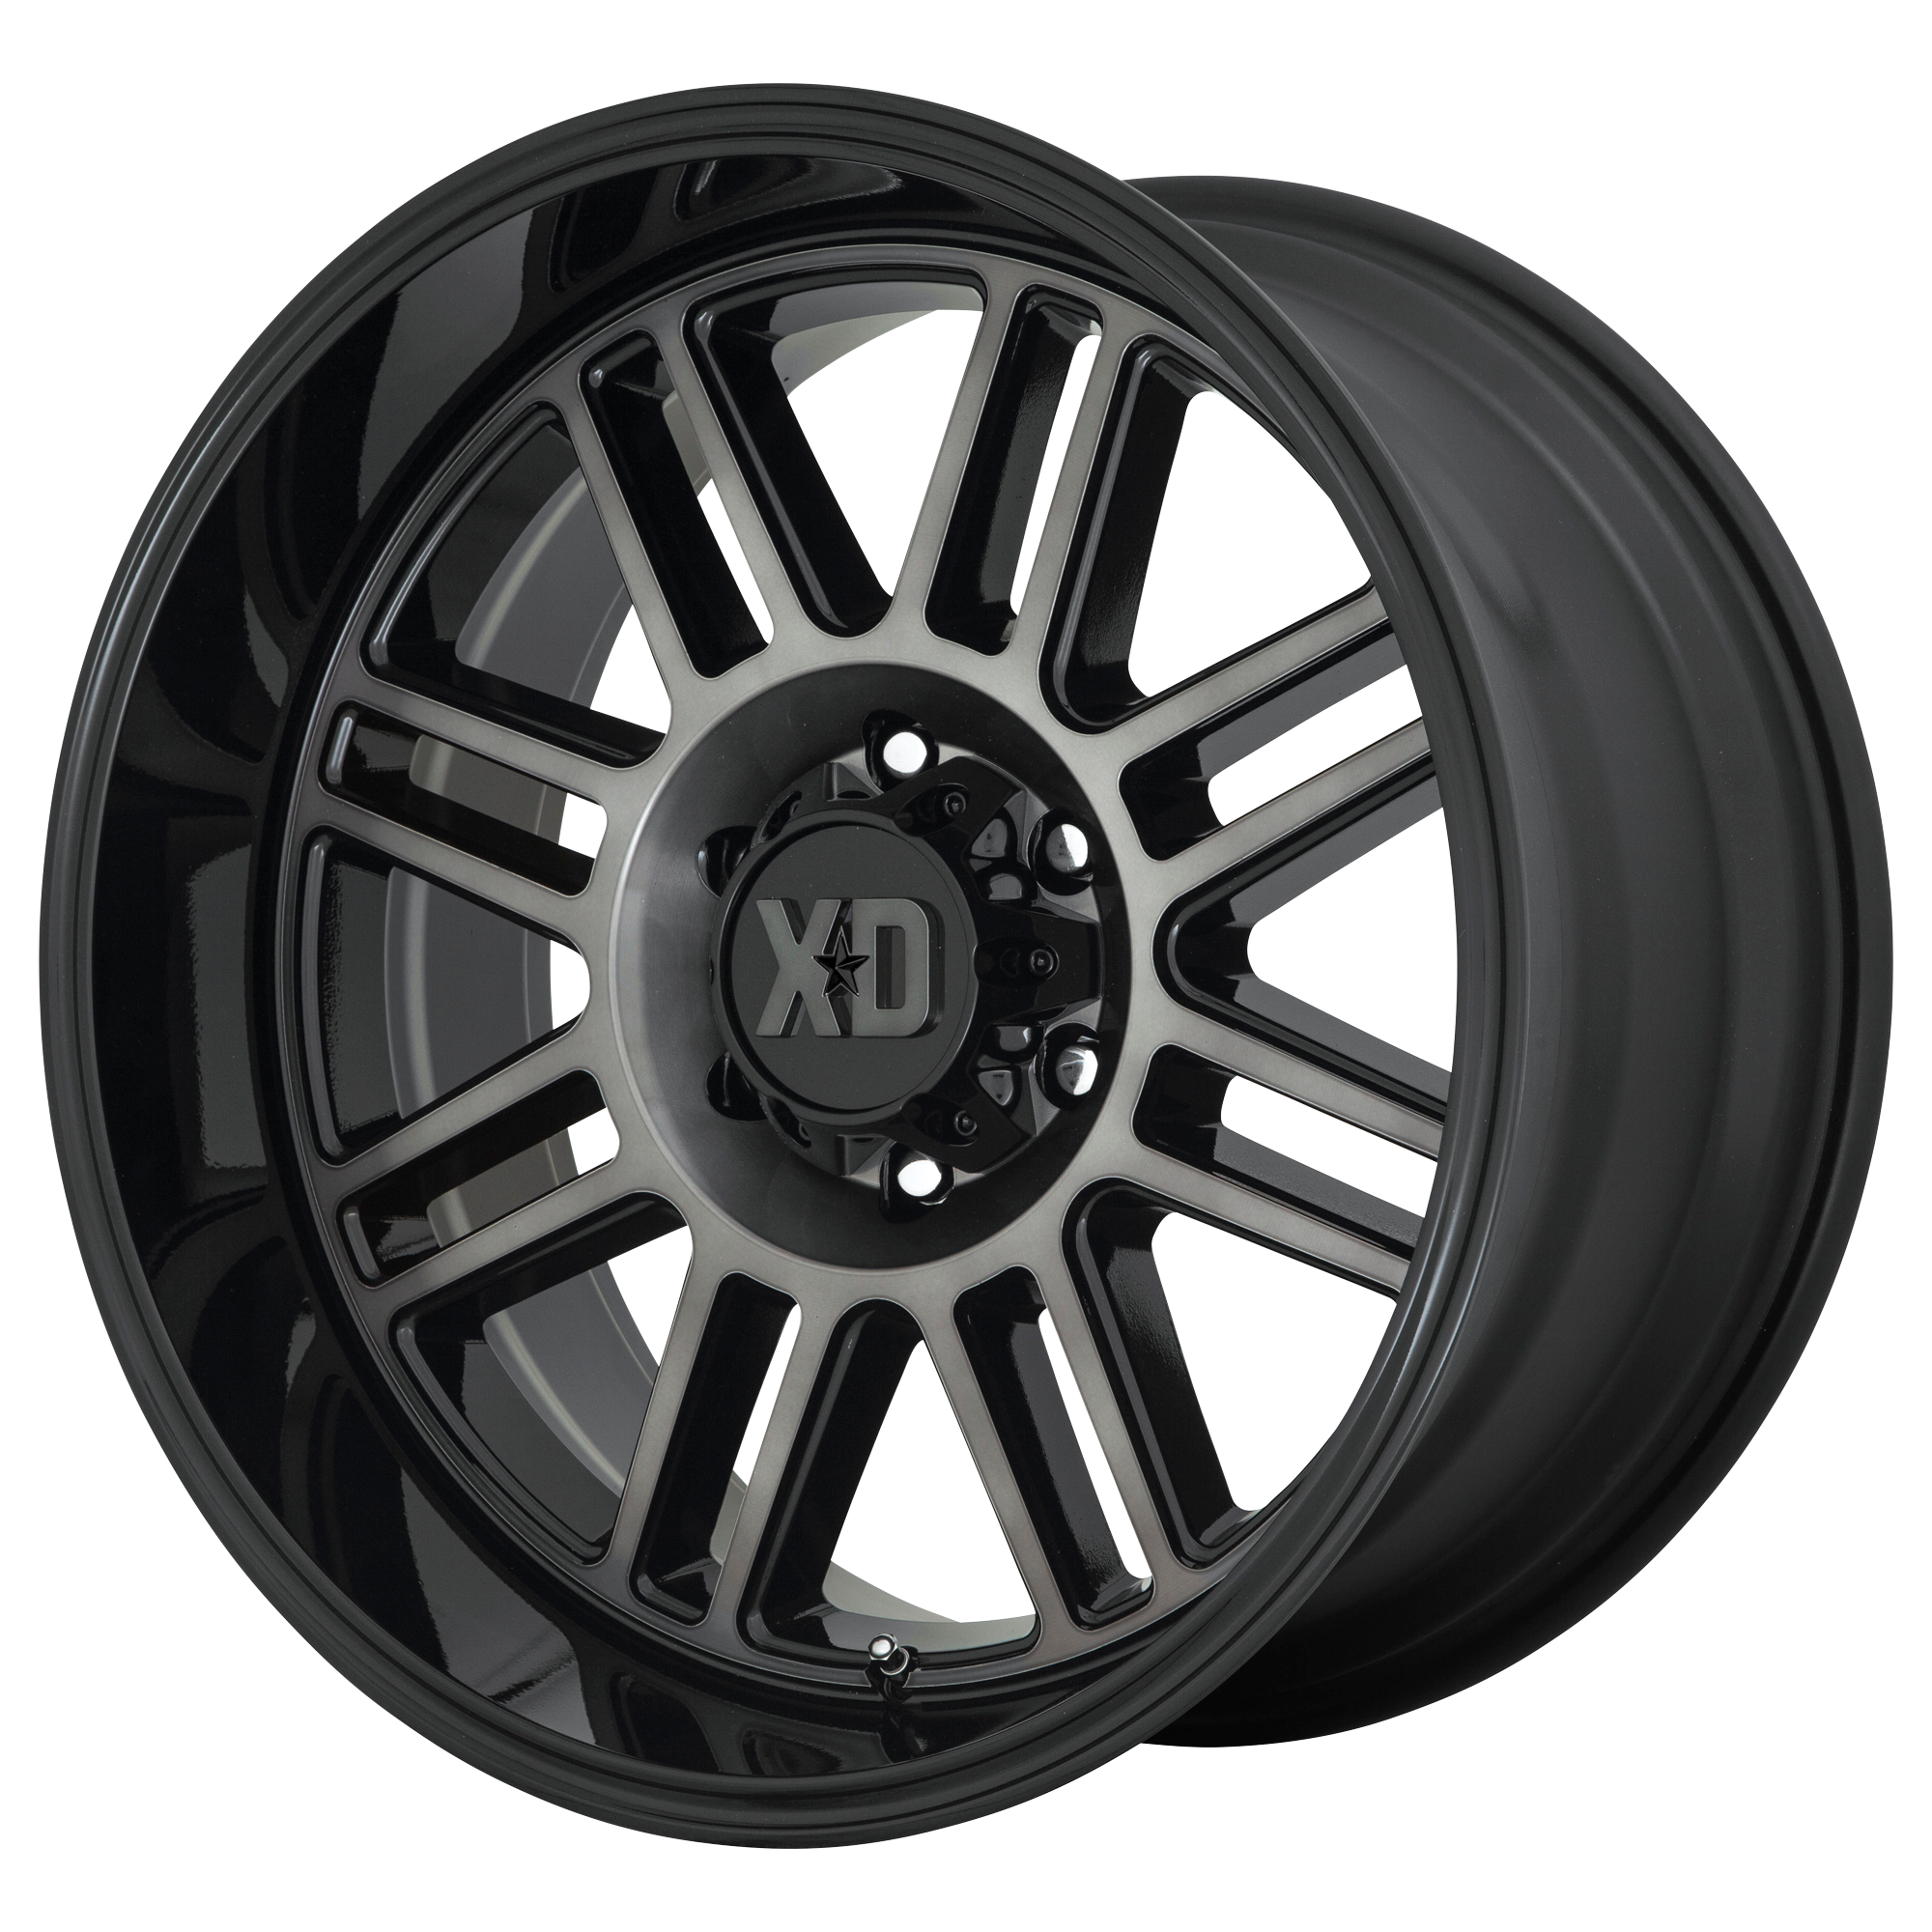 CAGE 20x10 8x165.10 GLOSS BLACK W/ GRAY TINT (-18 mm) - Tires and Engine Performance